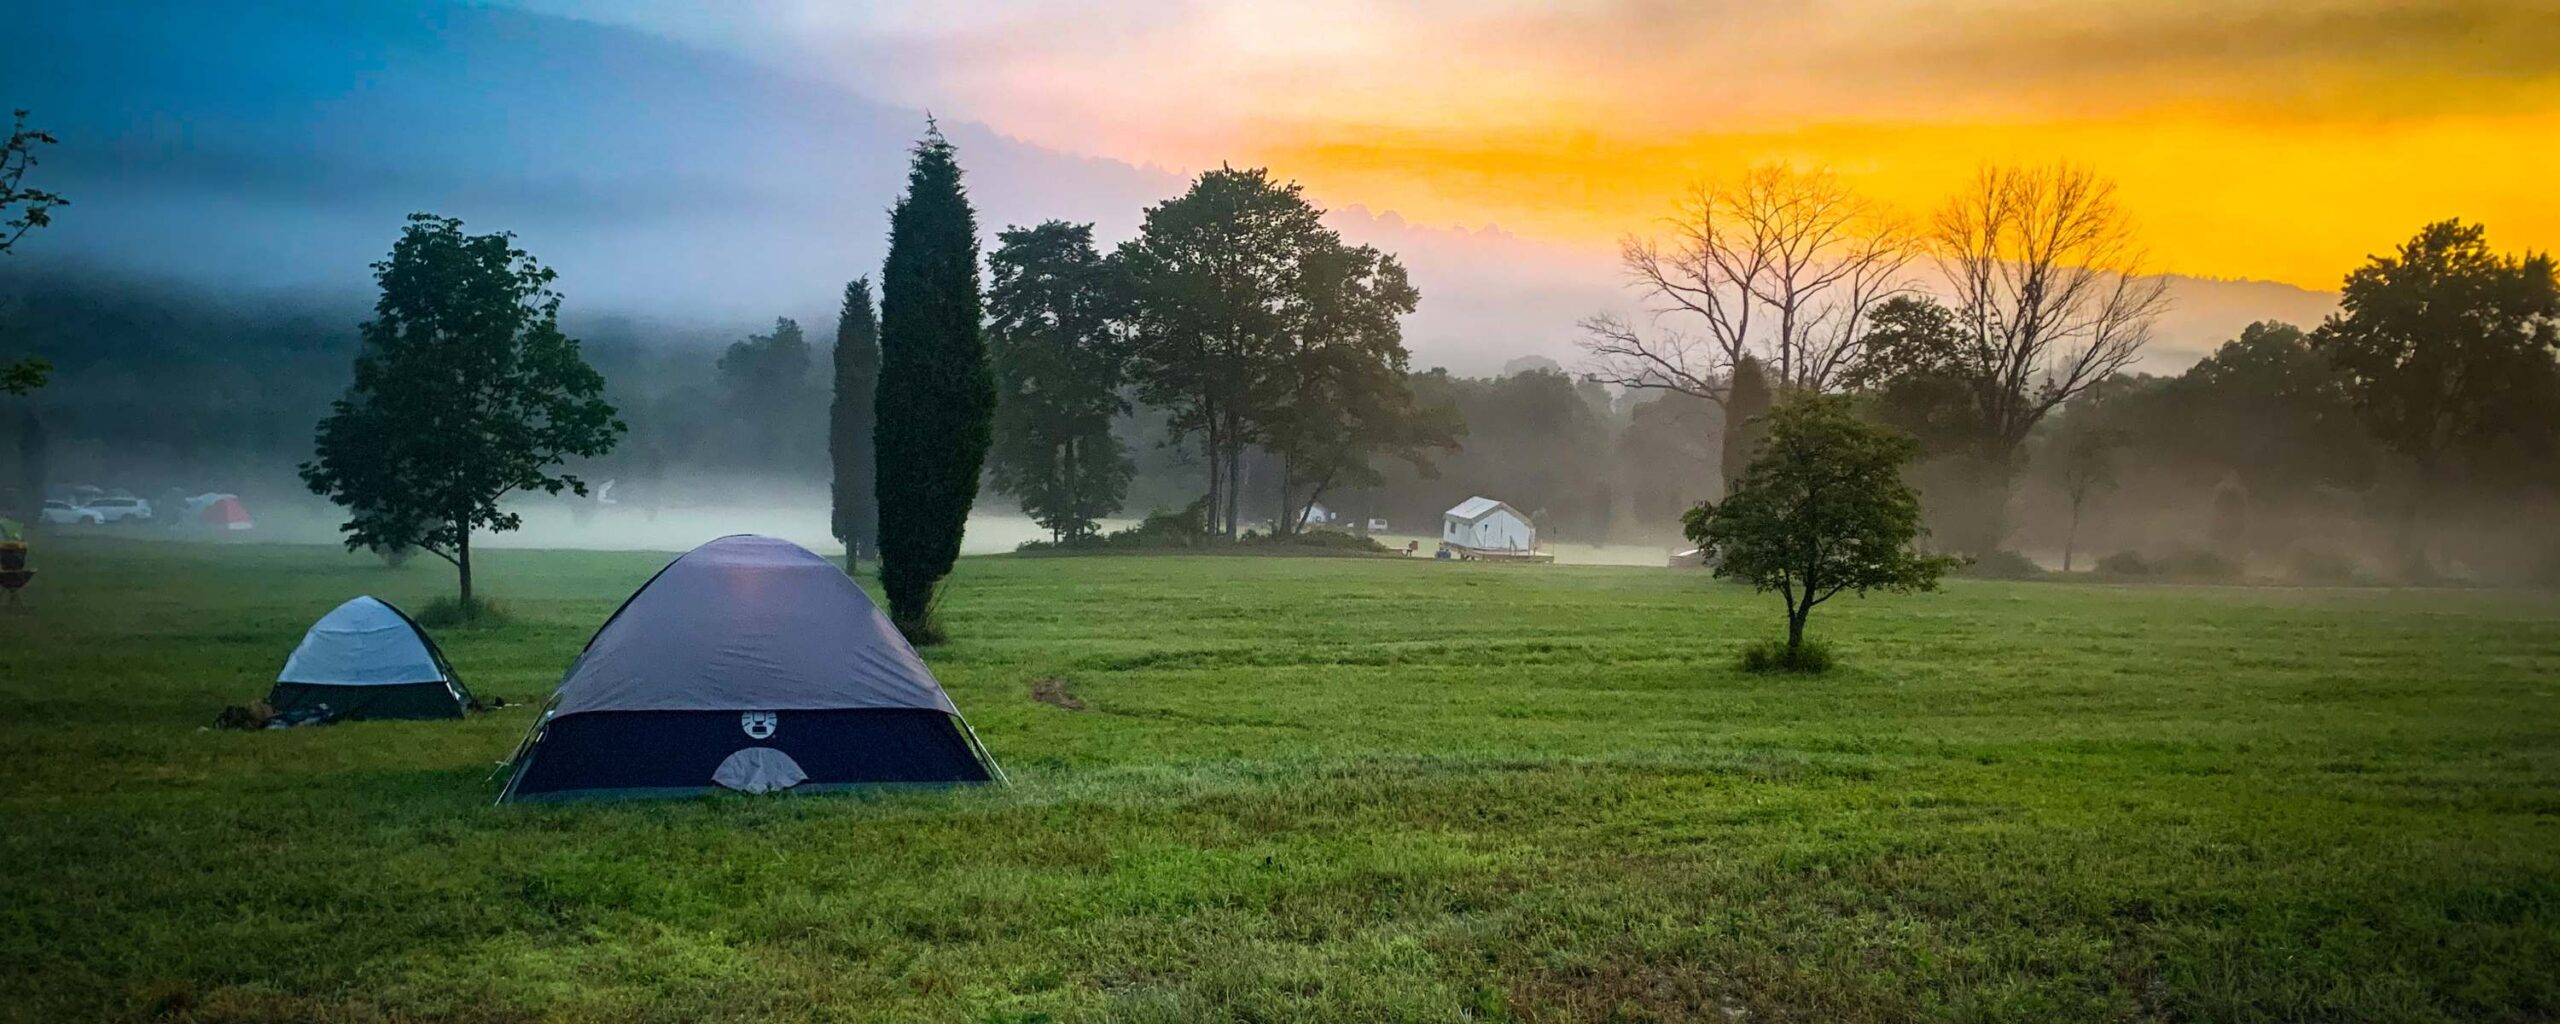 A picture of a tent in a field in the Pocono Mountains